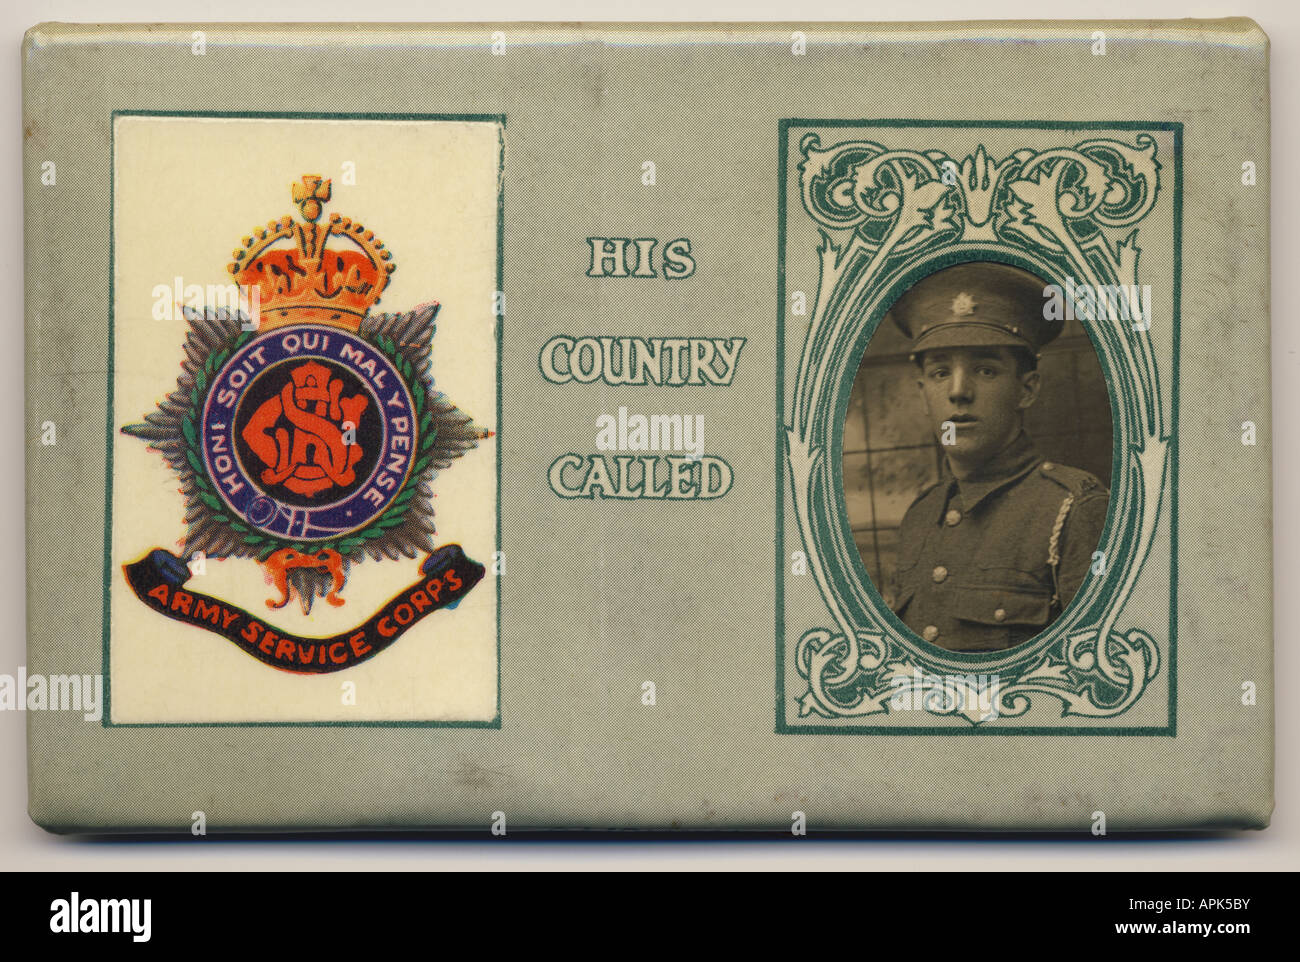 His Country Called Plaque for a British soldier who died in First World War Stock Photo